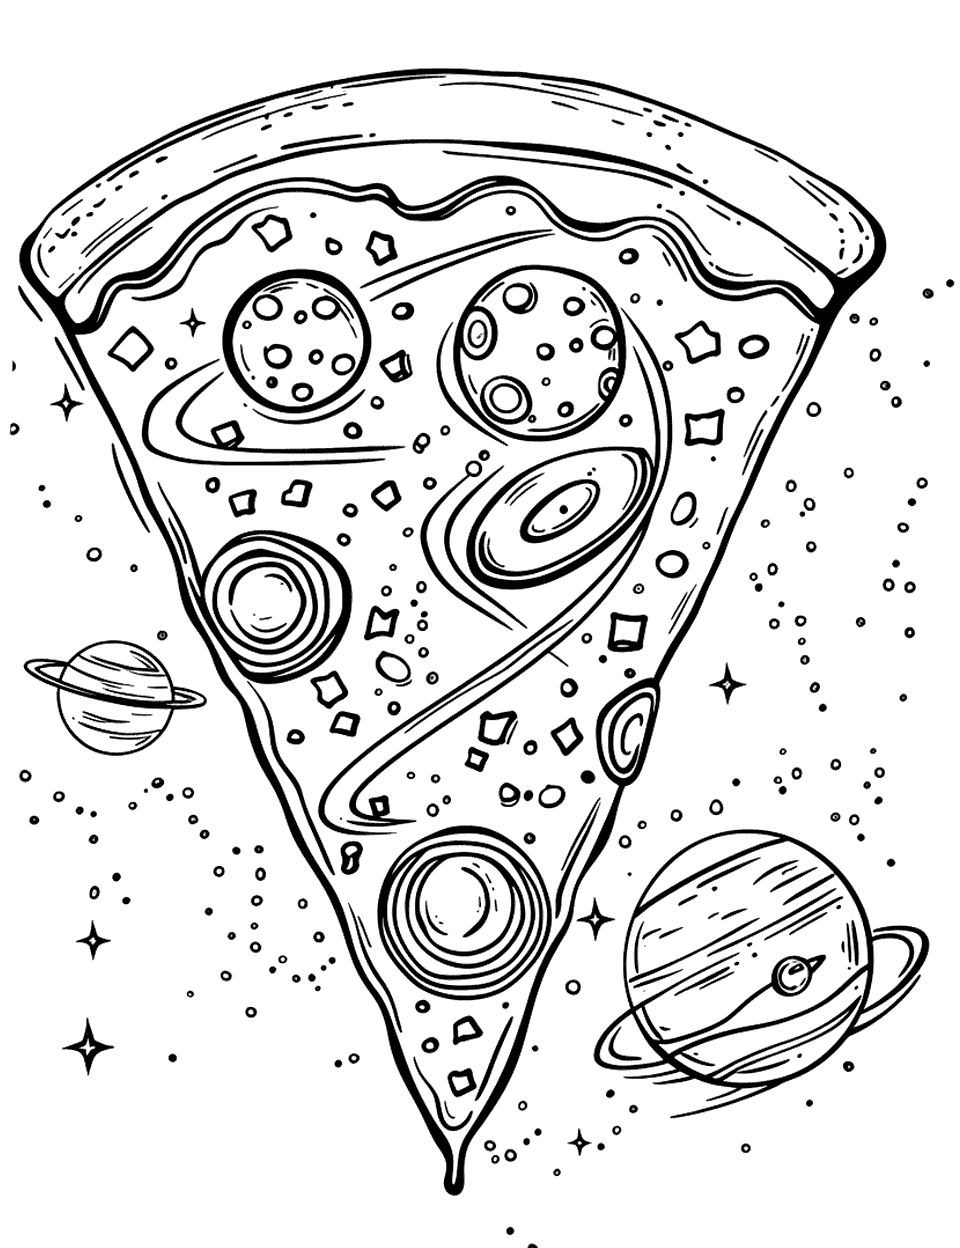 Space Pizza Coloring Page - A pizza slice made of various space themed toppings and food grade planets floating around it.